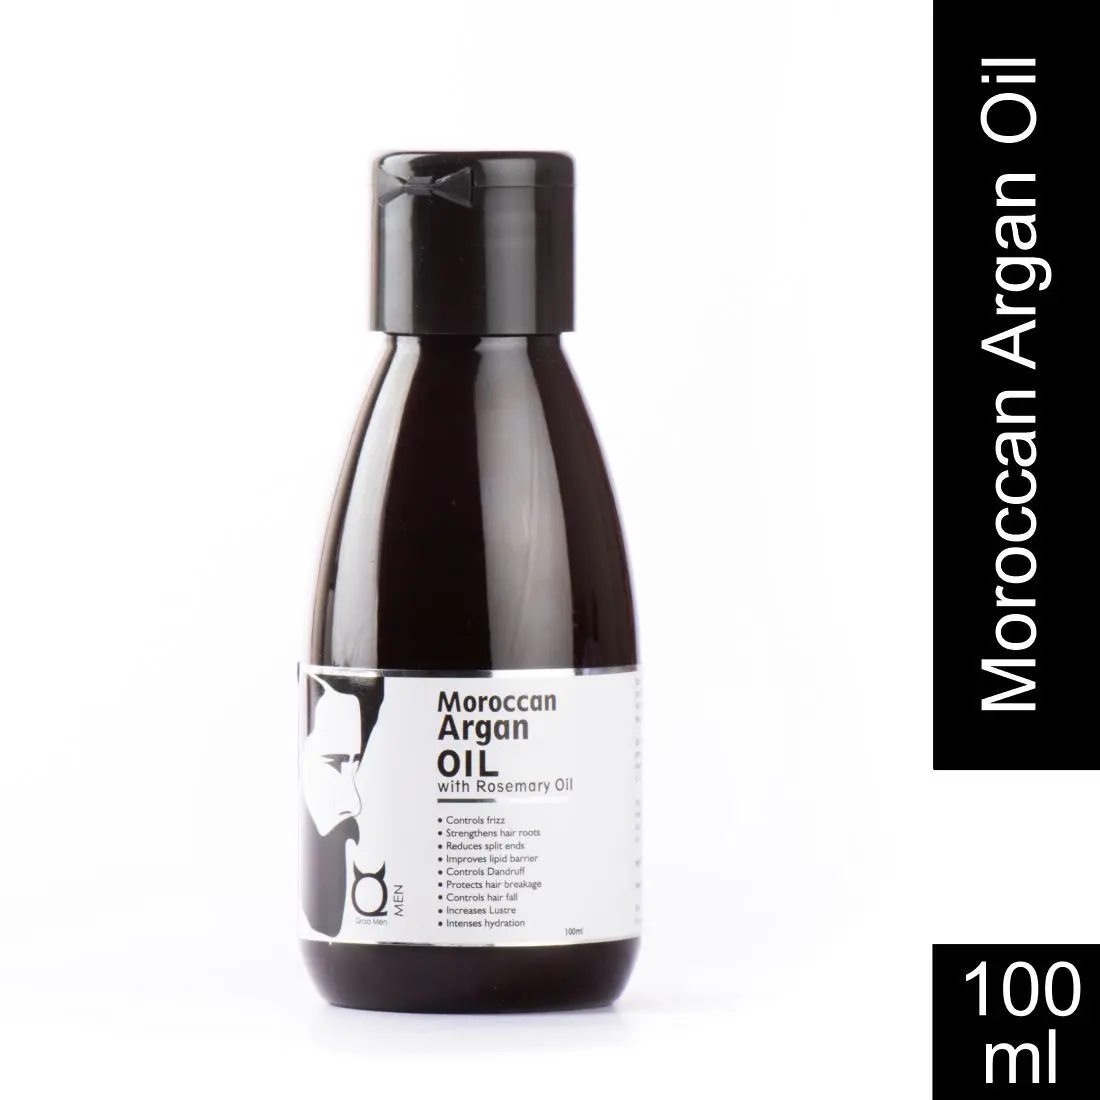 Qraa Men Moroccan Argan Oil With Rosemary Oil- Cold Pressed Oil